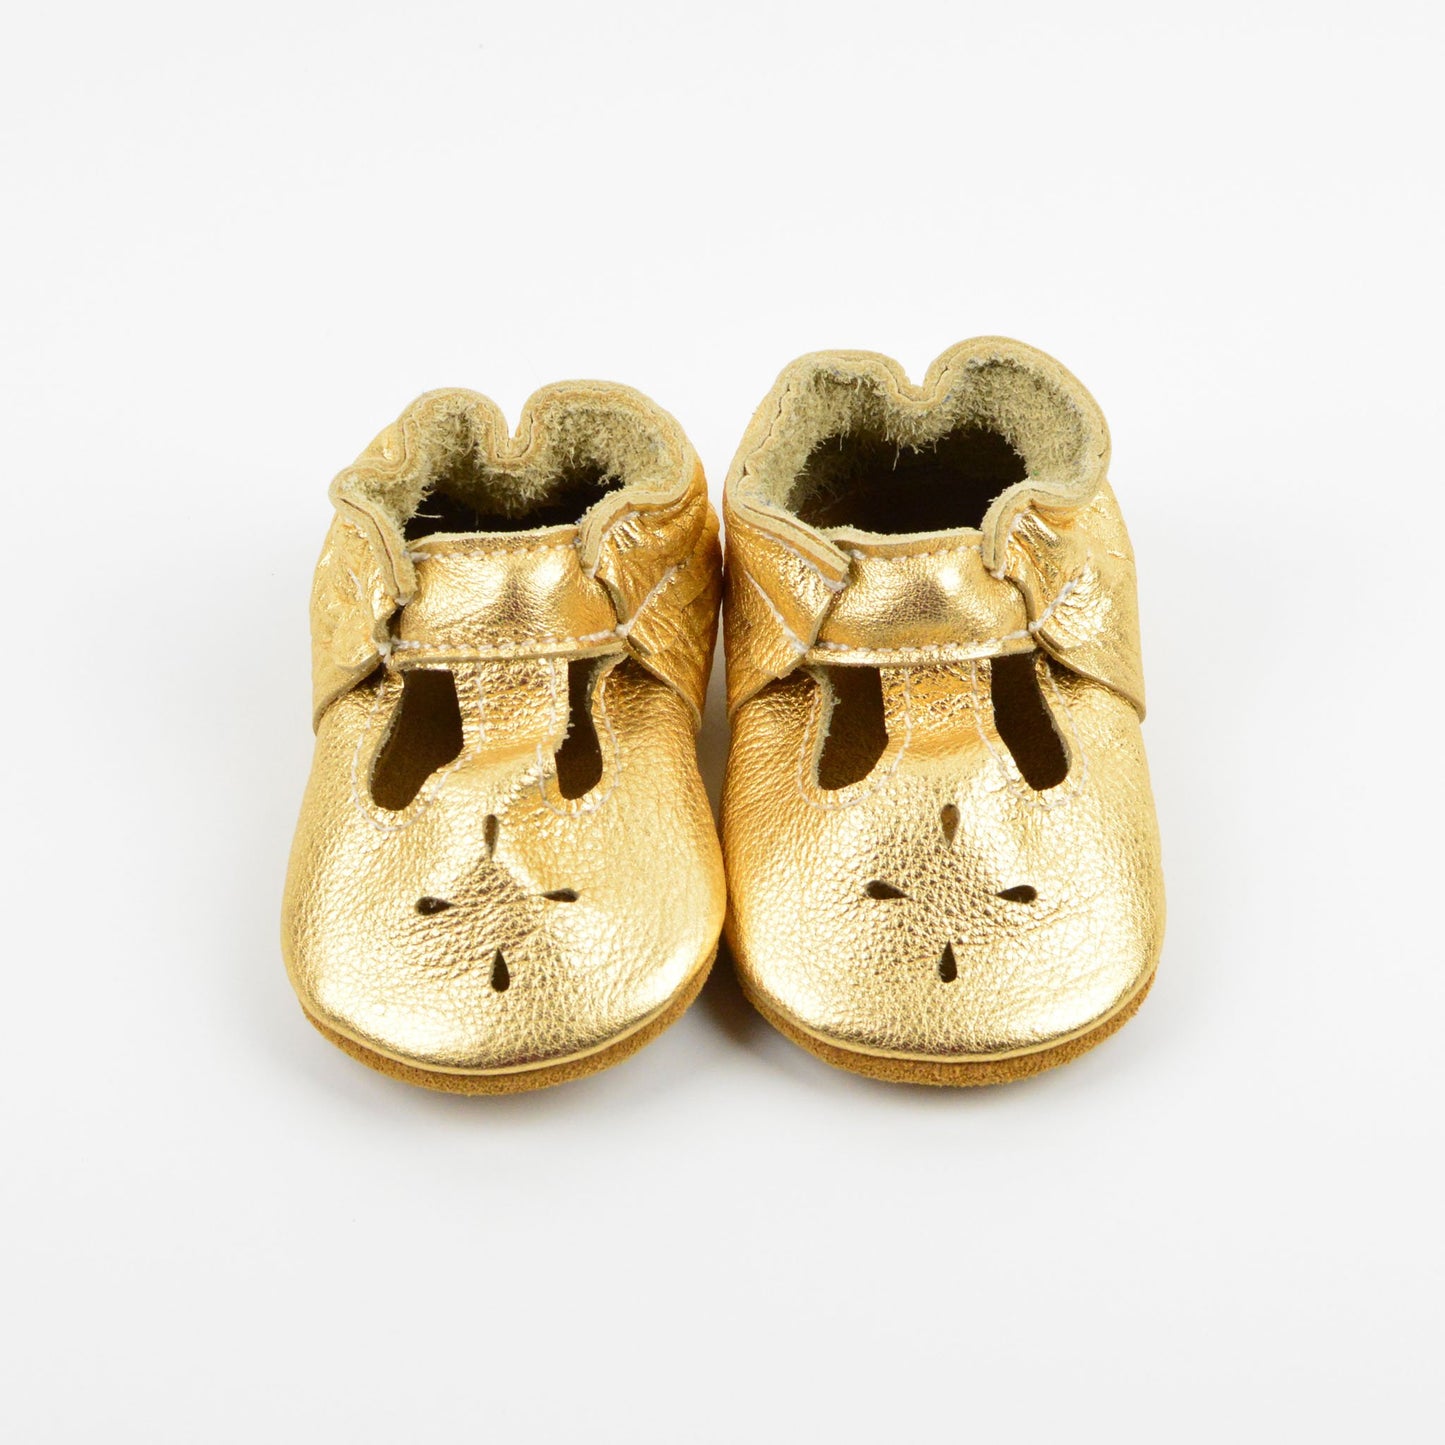 RTS Gold Metal T-straps With Tan Suede Leather Soles - Size 3 (12-18M)(5")